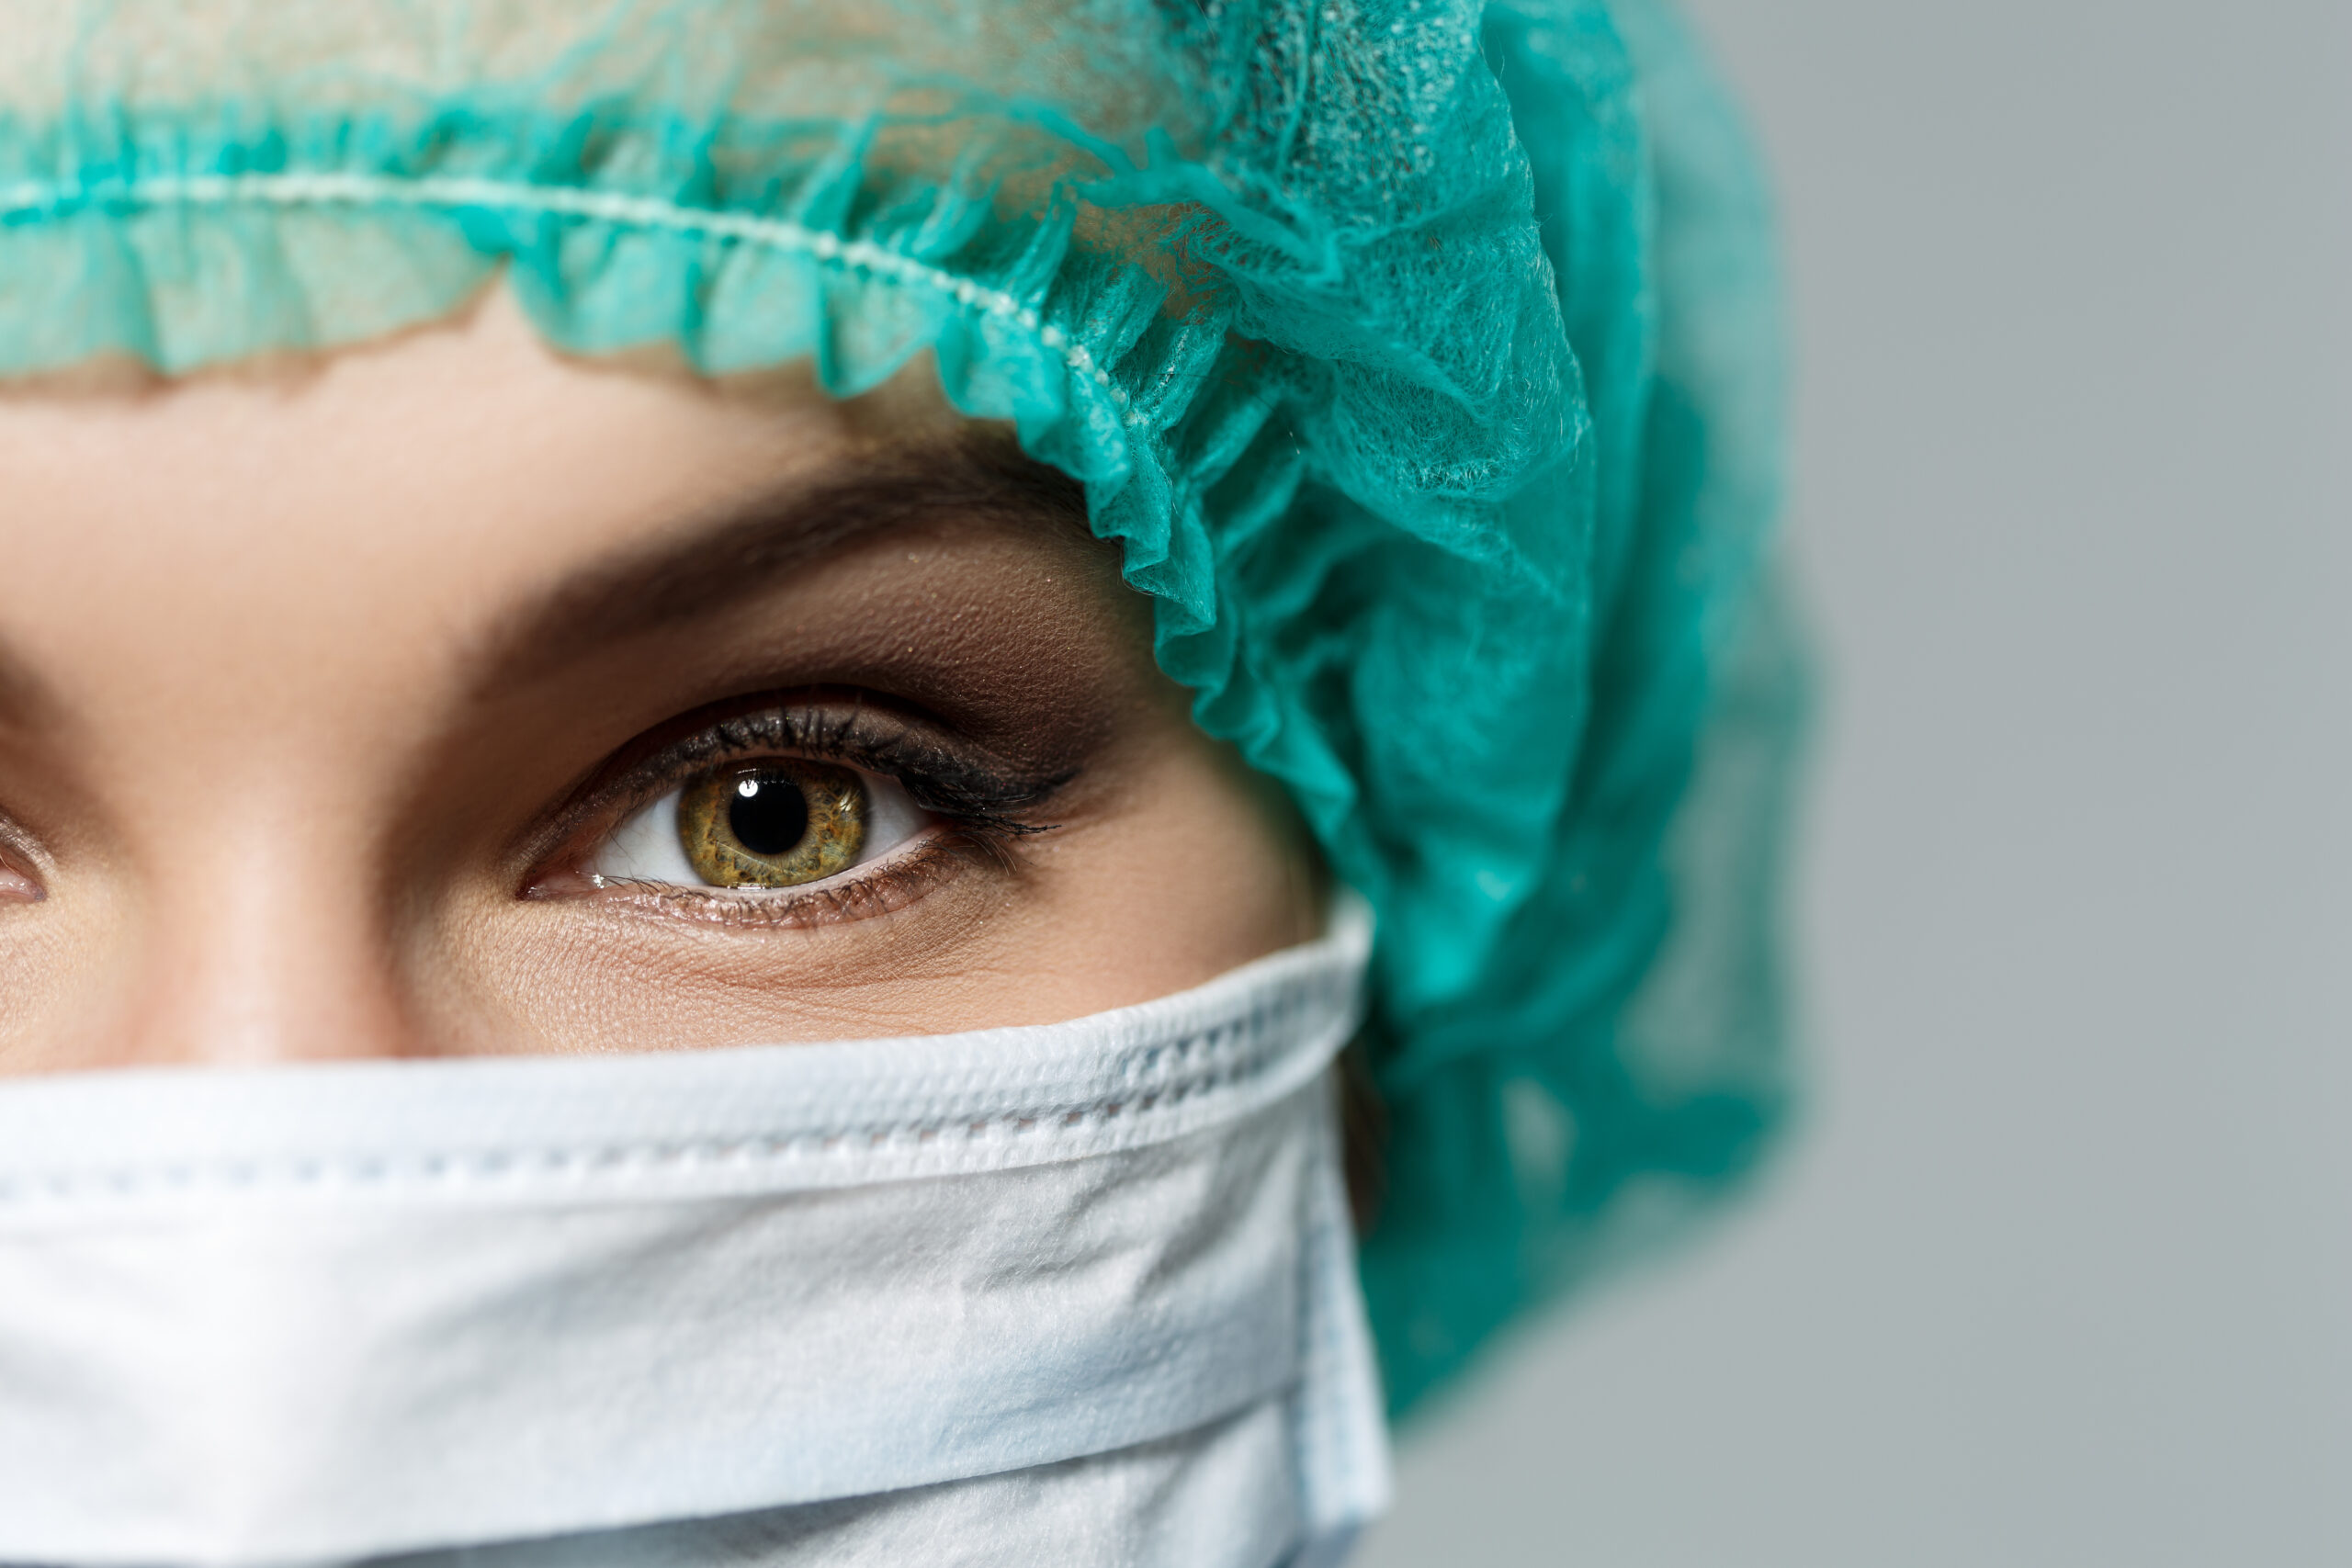 Female doctor's face wearing protective mask and green surgeon's cap closeup. Surgeon's eyes close up gazing intently in camera. Resuscitation concept.